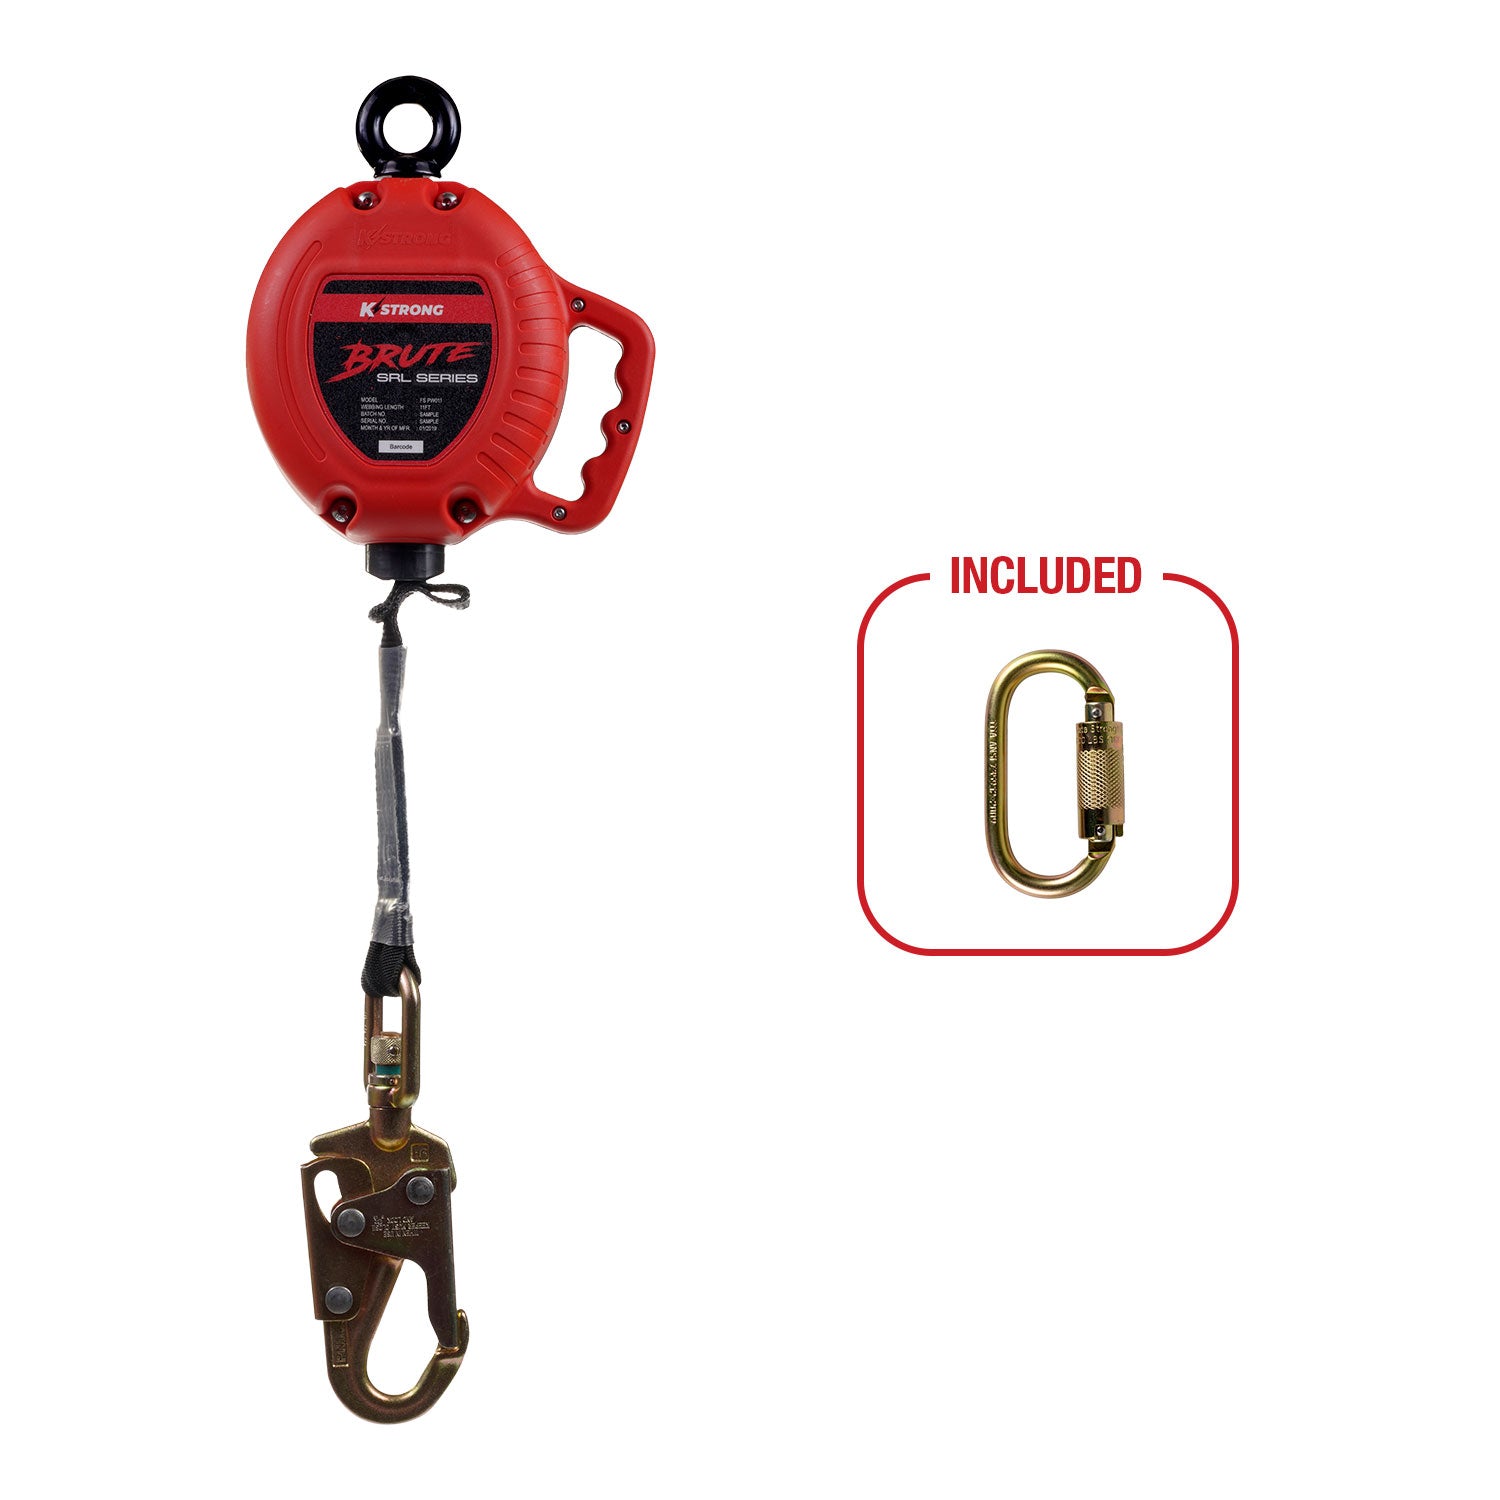 KStrong UFS350011 BRUTE 11 ft Web SRL with snap hook, Includes installation carabiner